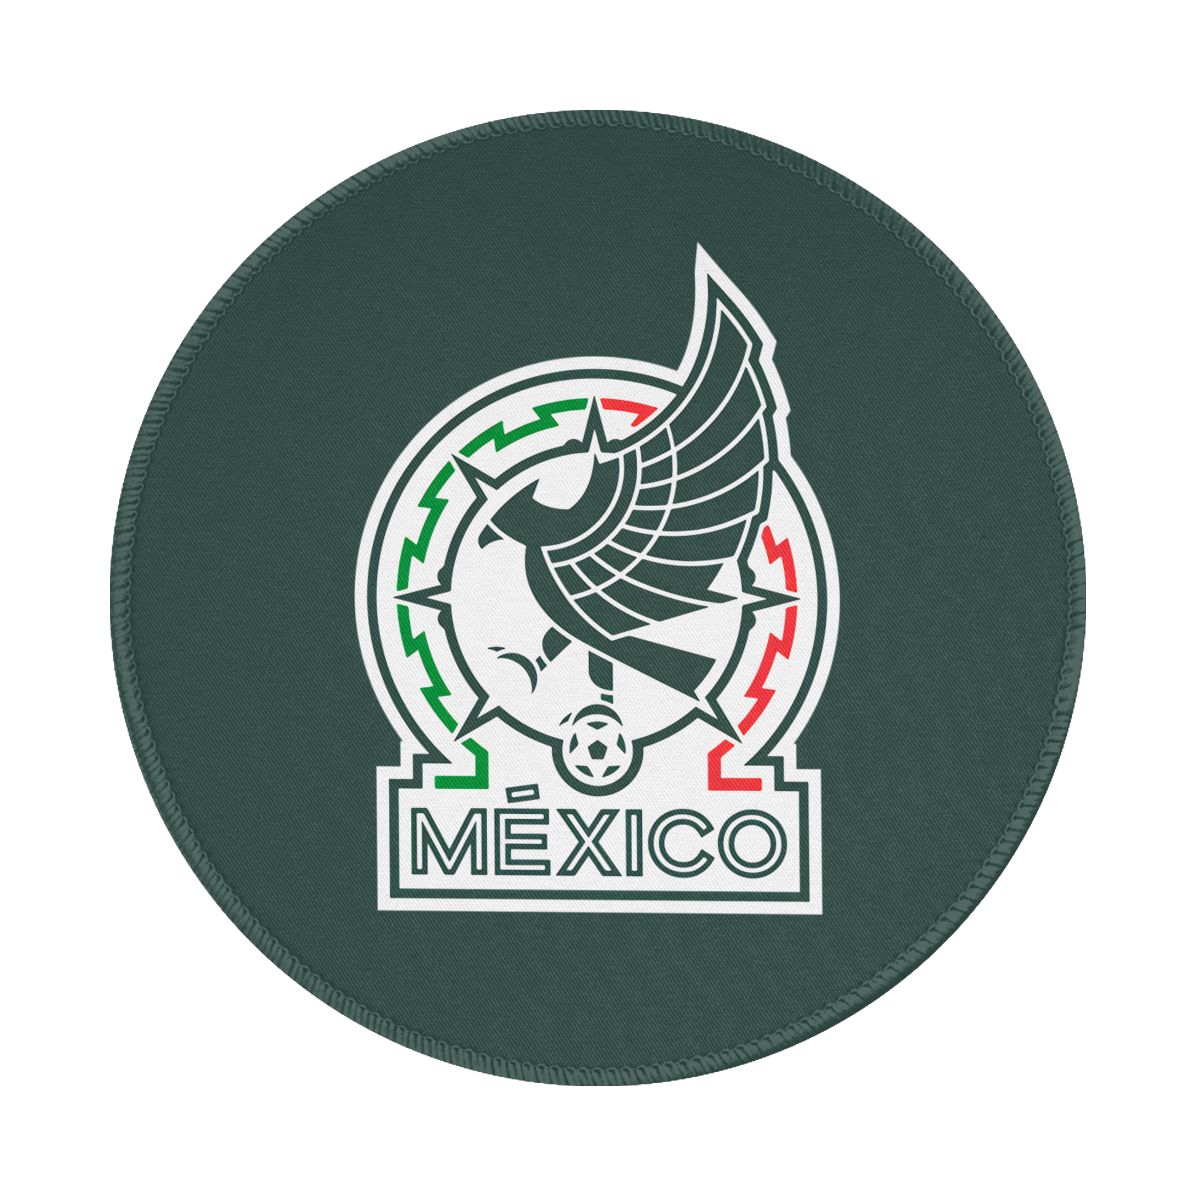 Mexico National Football Team Round Non-Slip Thick Rubber Modern Gaming Mousepad